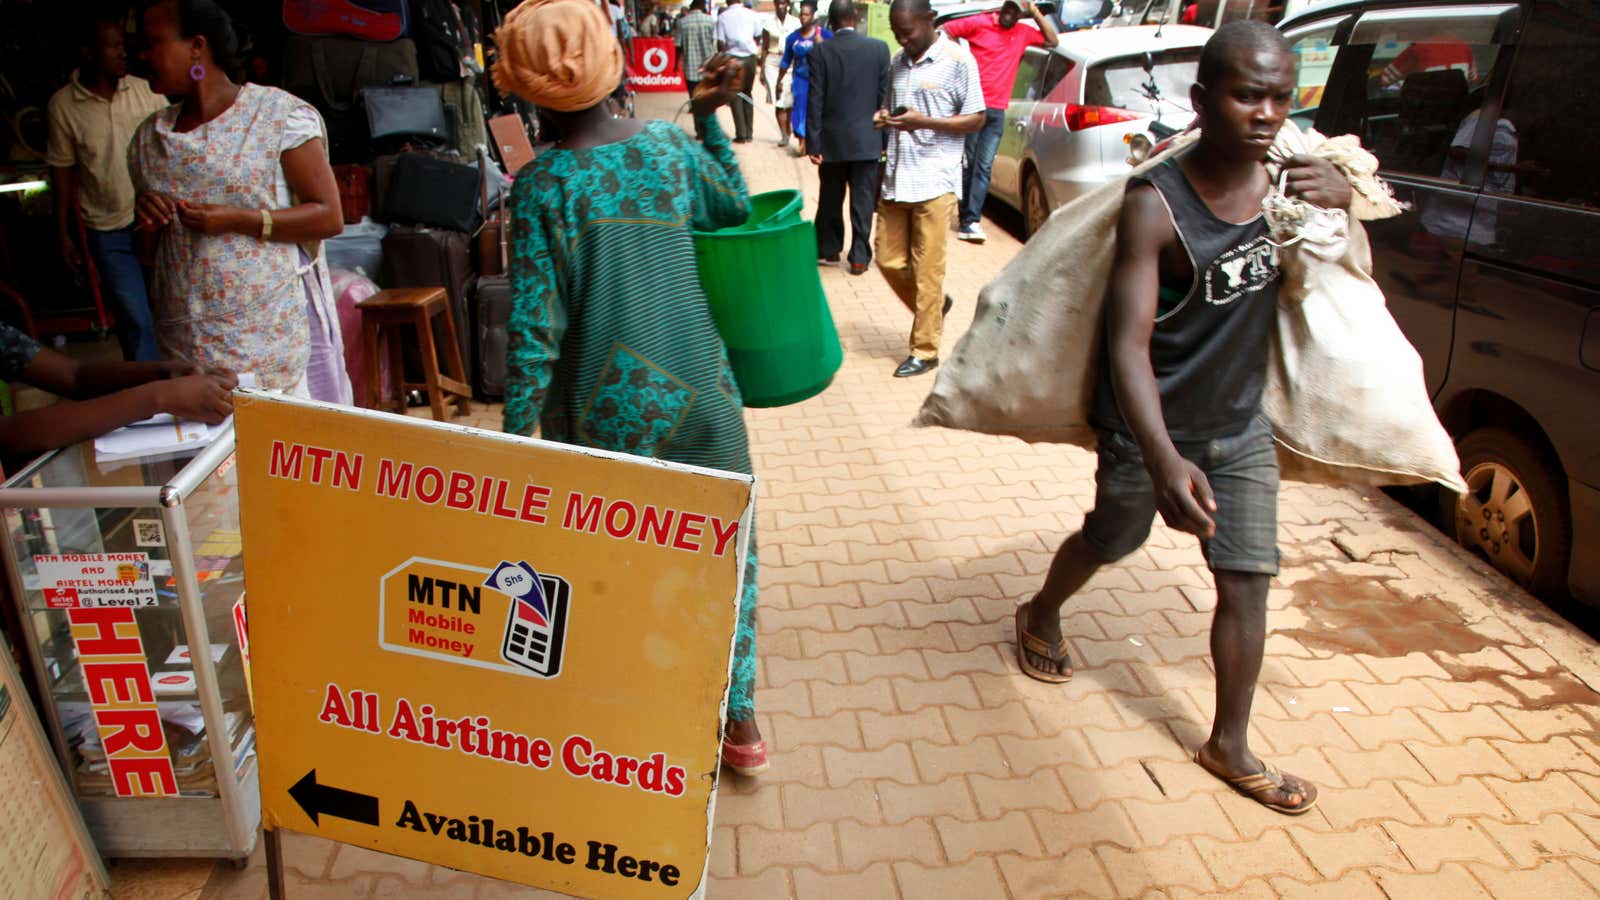 The Bank of Uganda has lowered limits on the value of check payments to promote e-payments.